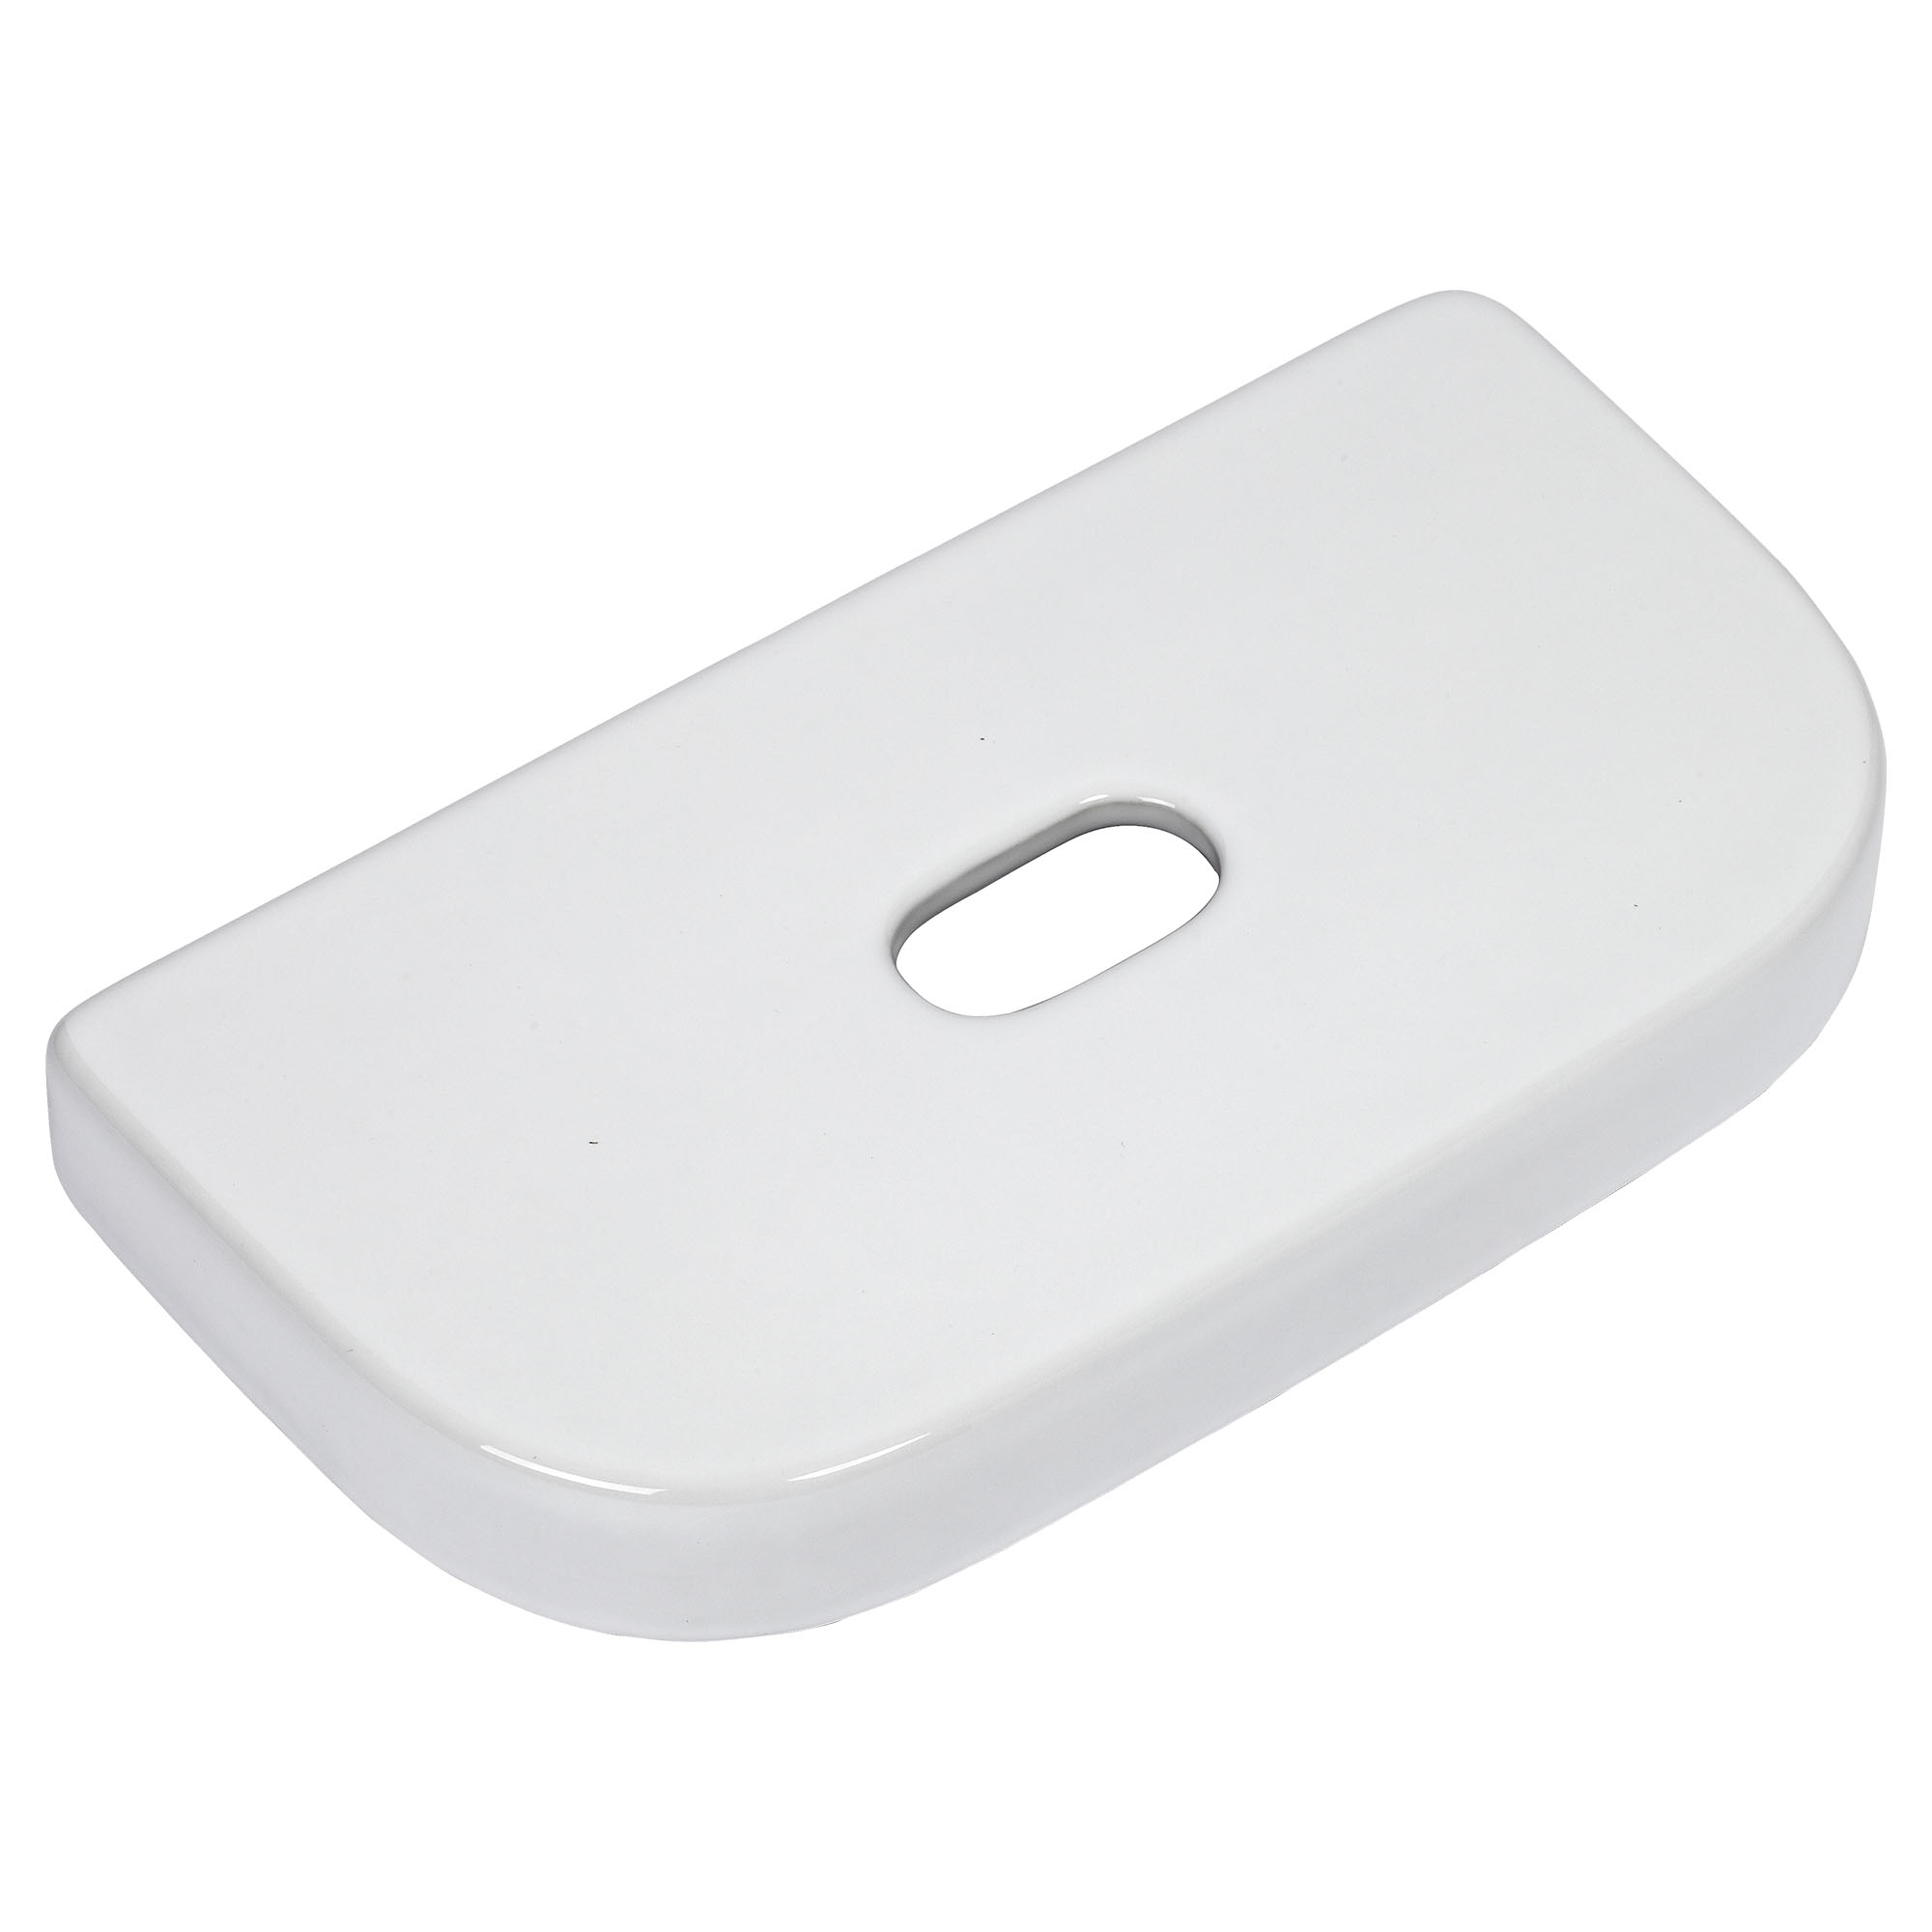 Equility® Toilet Tank Cover